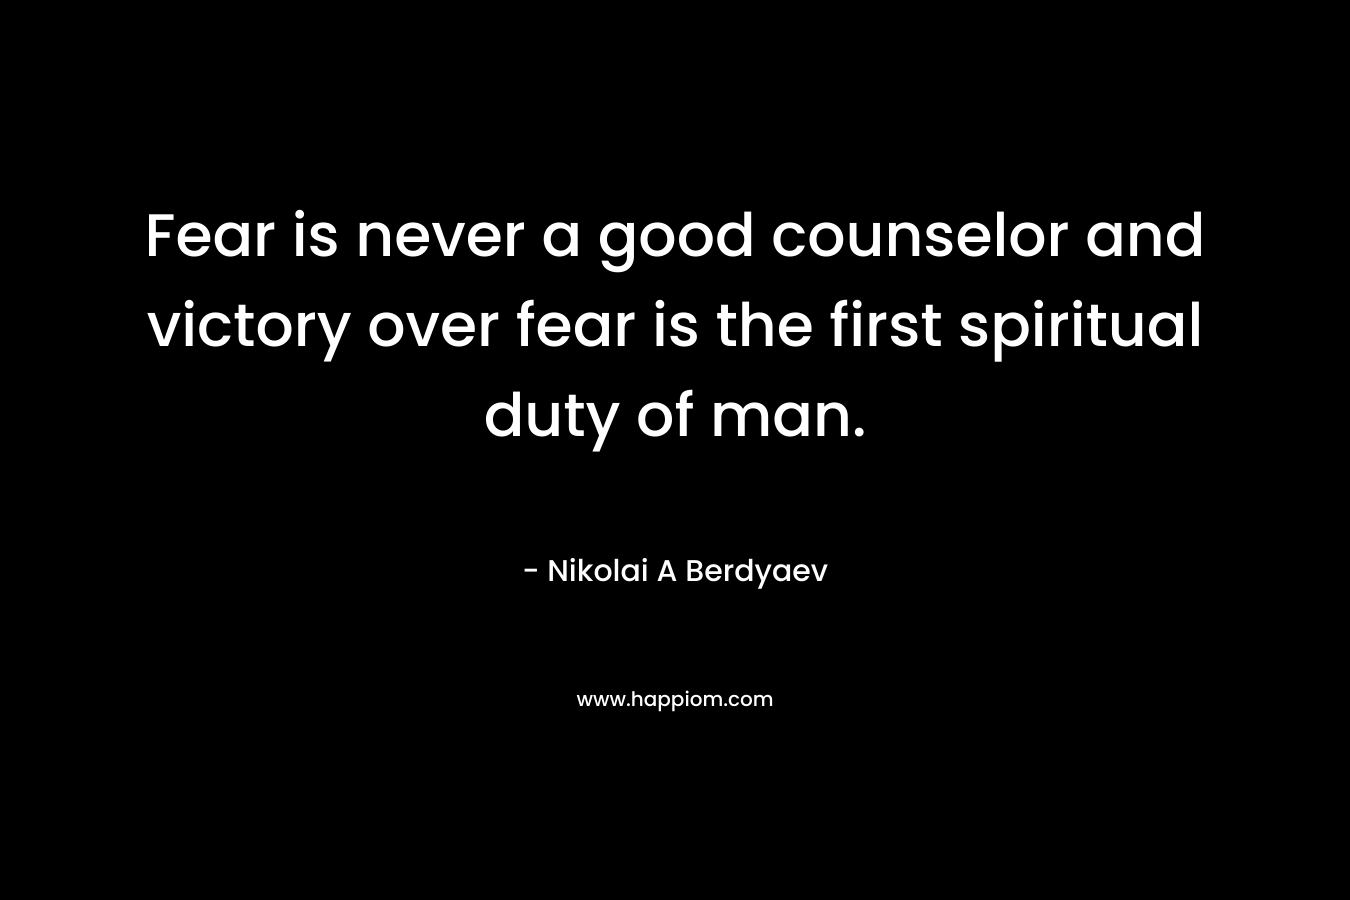 Fear is never a good counselor and victory over fear is the first spiritual duty of man. – Nikolai A Berdyaev